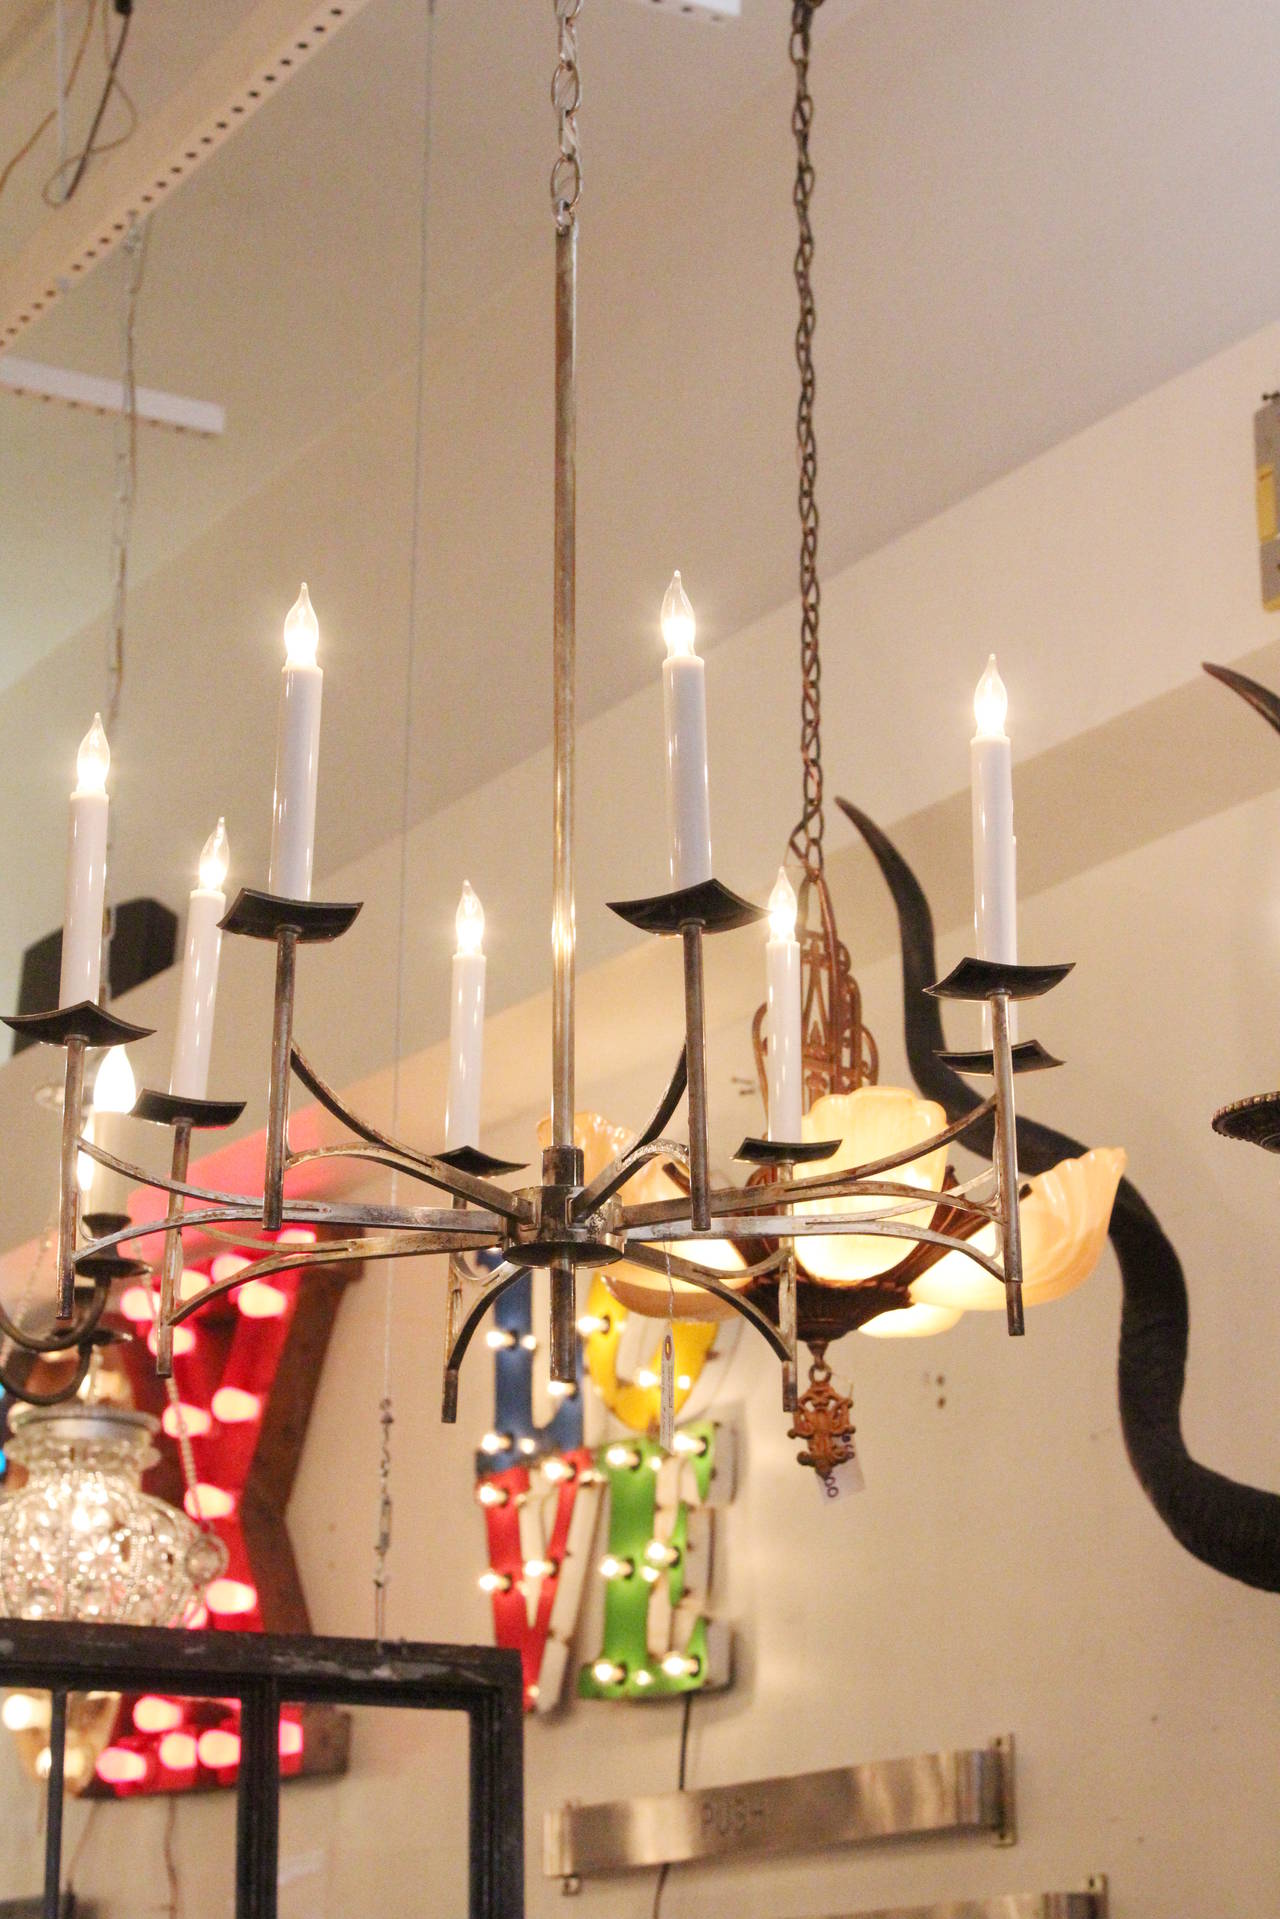 Mid-Century Modern silver plated French chandelier with eight arms from the 1950s. Chain and canopy are new. This item can be seen at our 302 Bowery location in Manhattan.